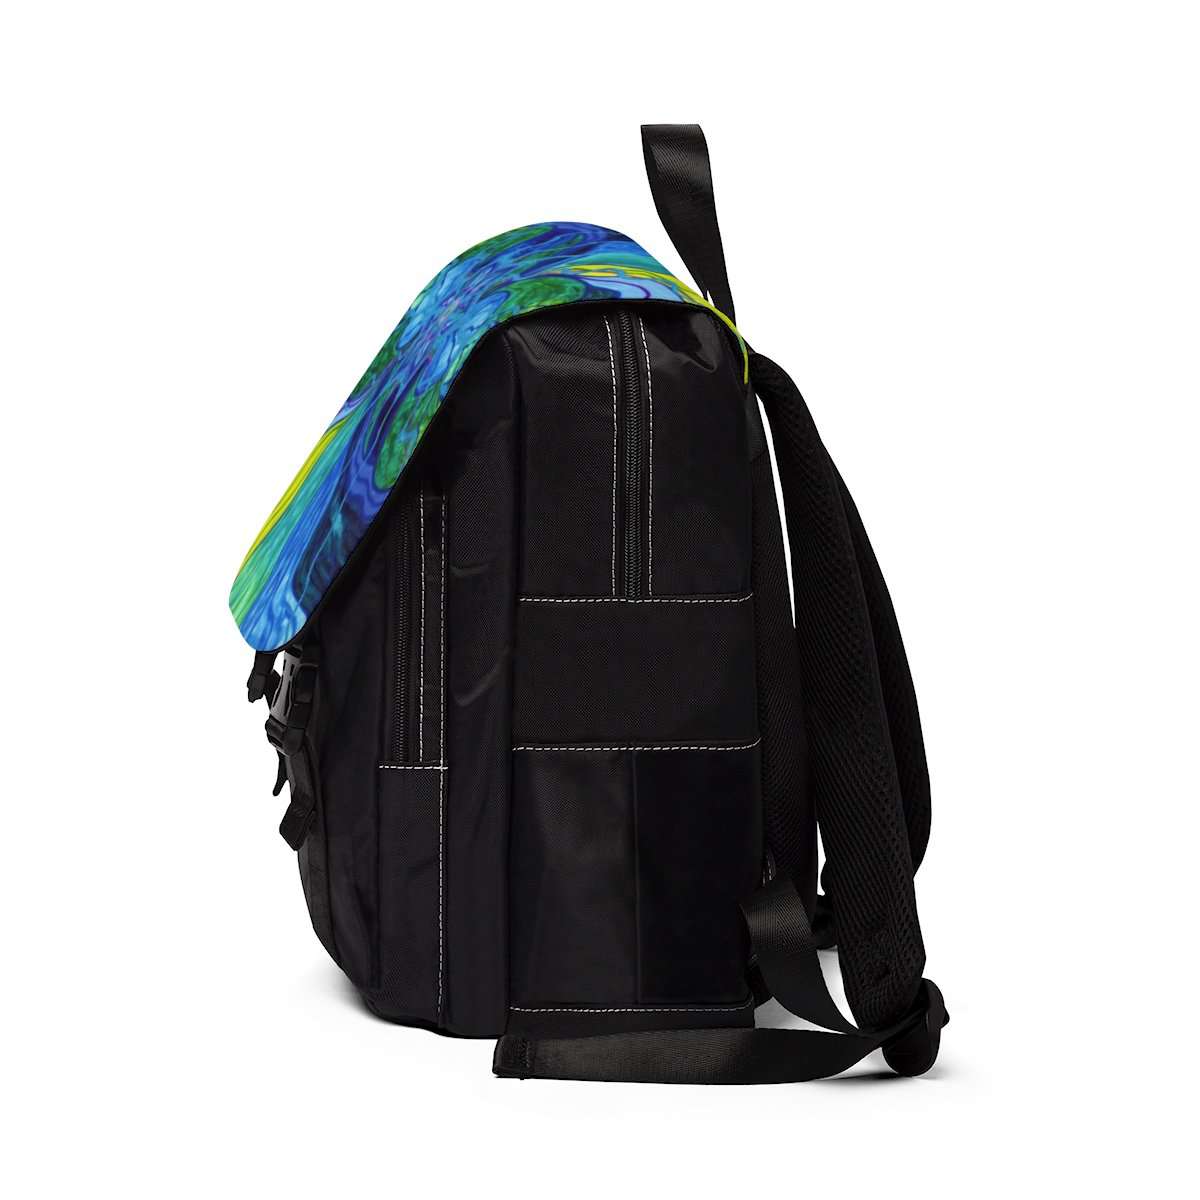 Tranquility - Unisex Casual Shoulder Backpack